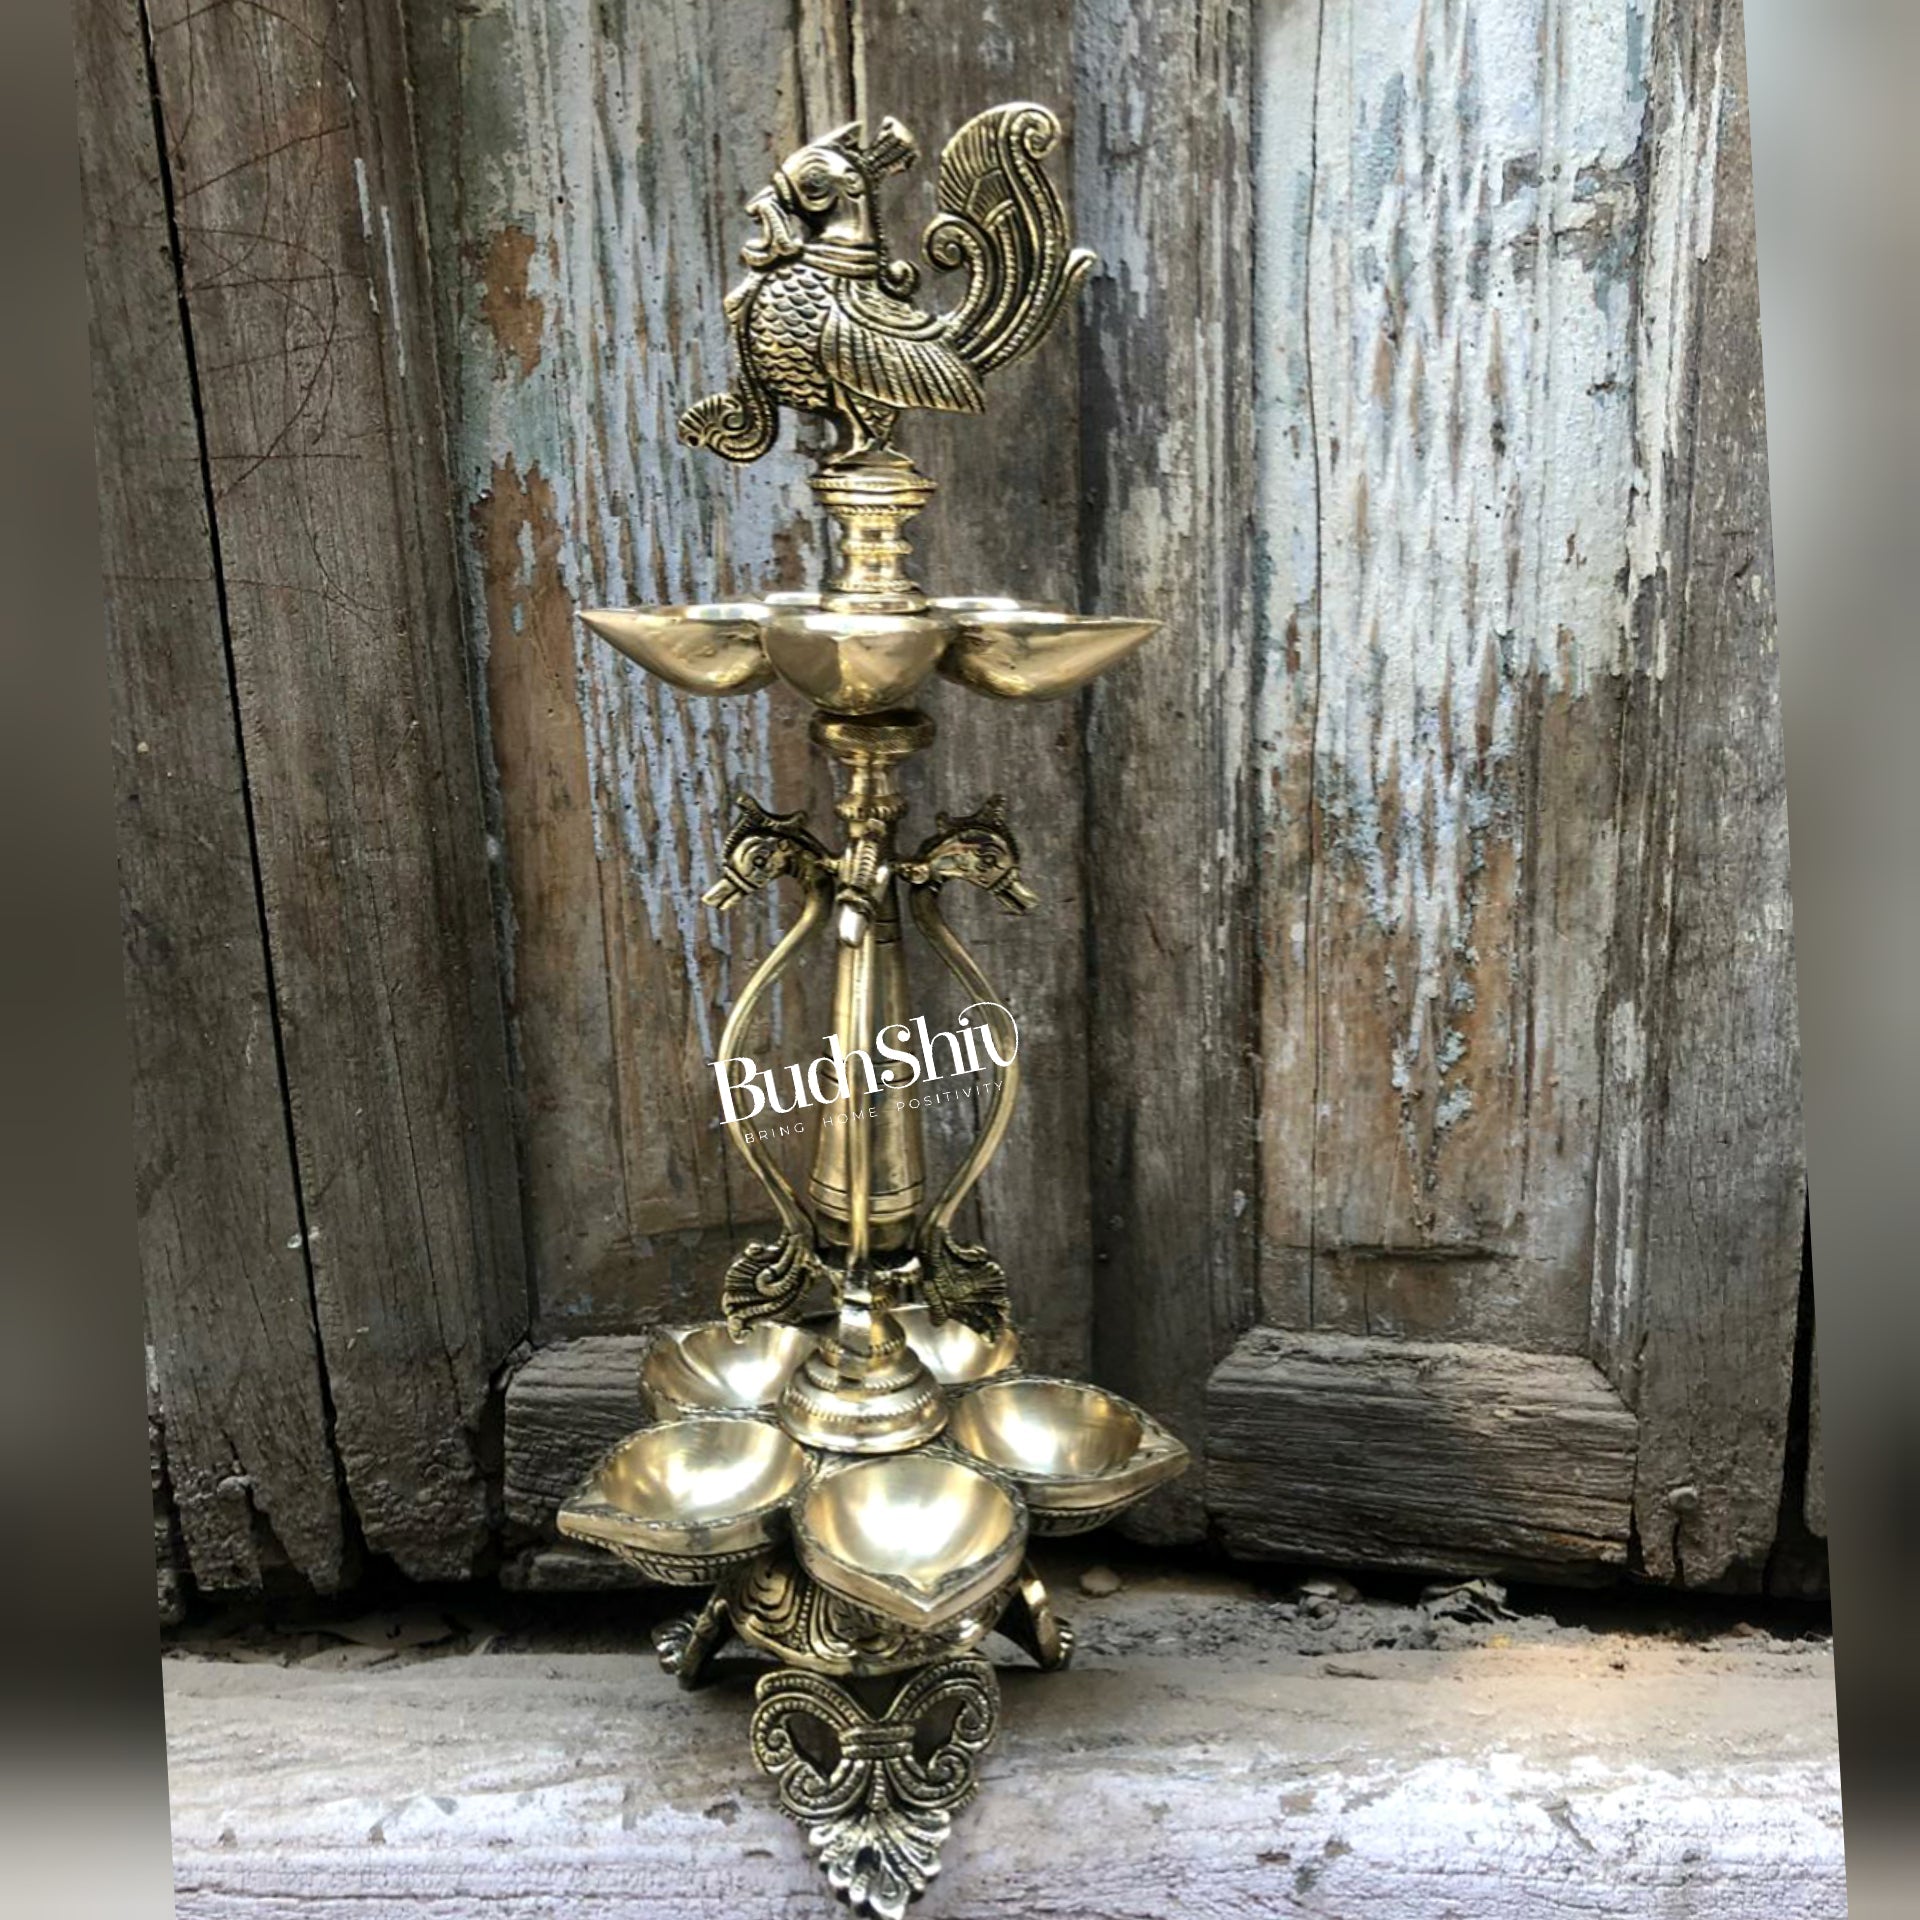 Peacock brass lamp superfine 16 inches - Budhshiv.com